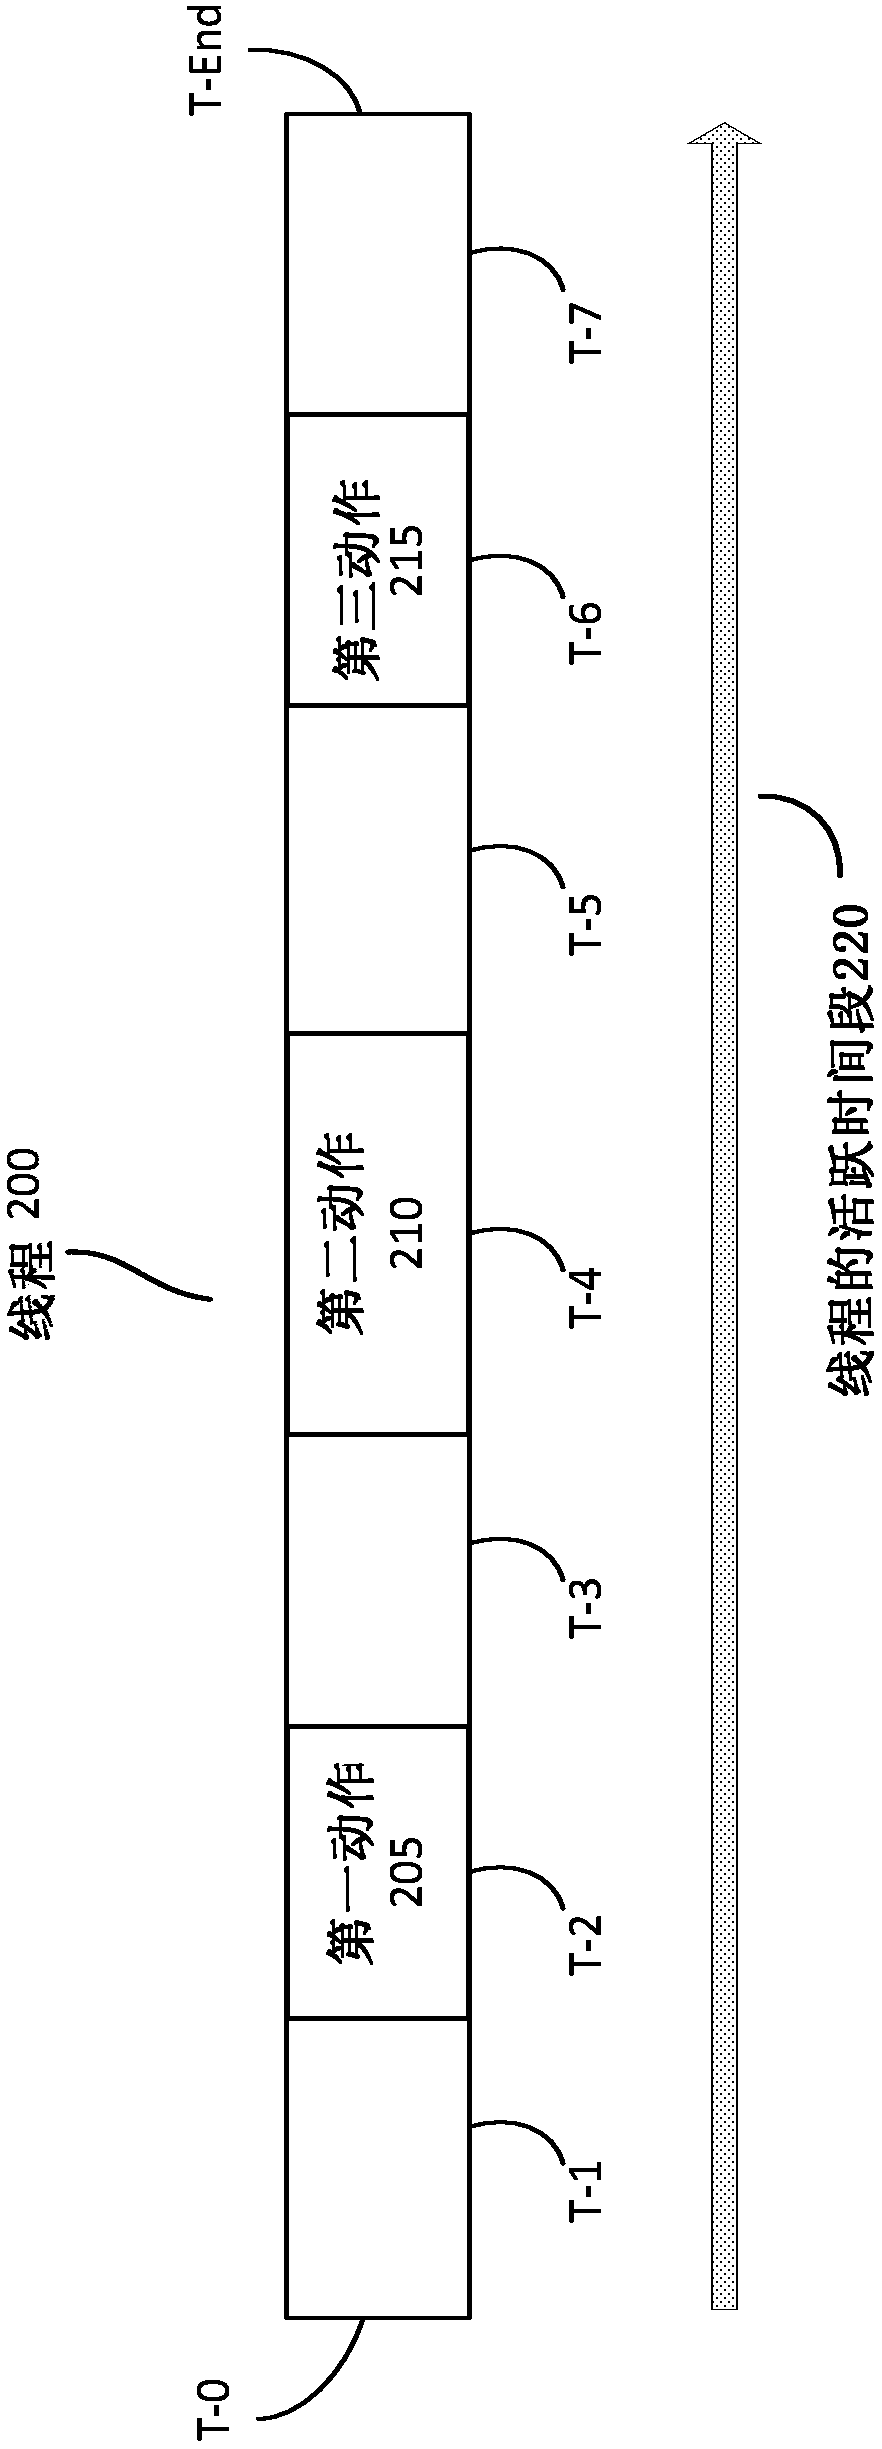 Sequence dependent operation processing of packet based data message transmissions